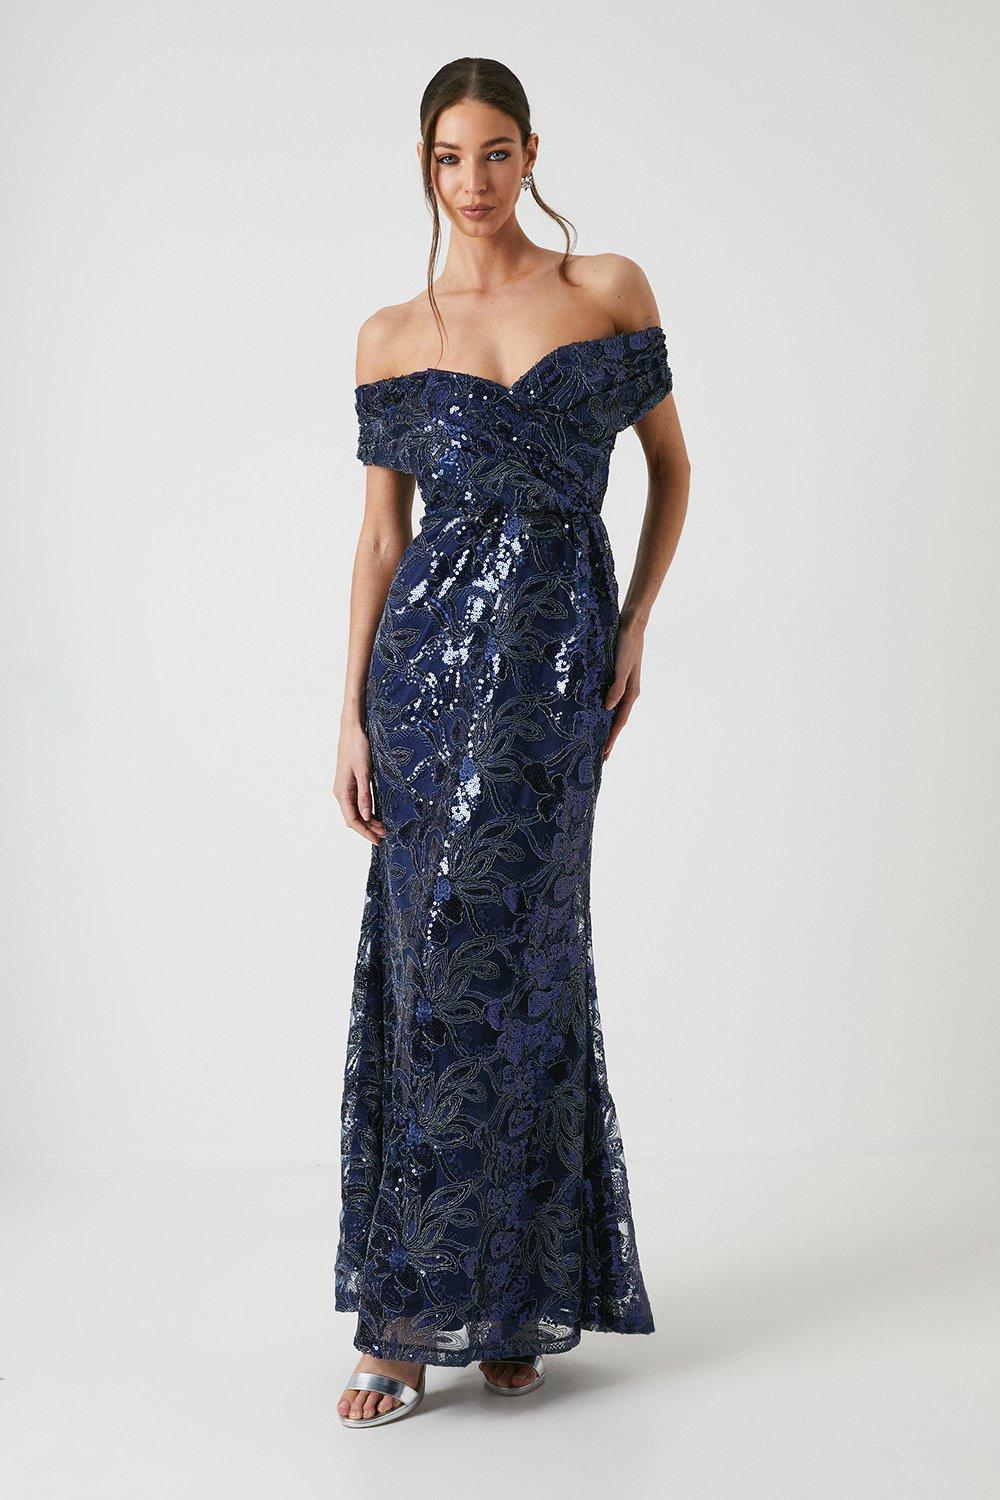 Floral Mesh Bardot Gown - Navy